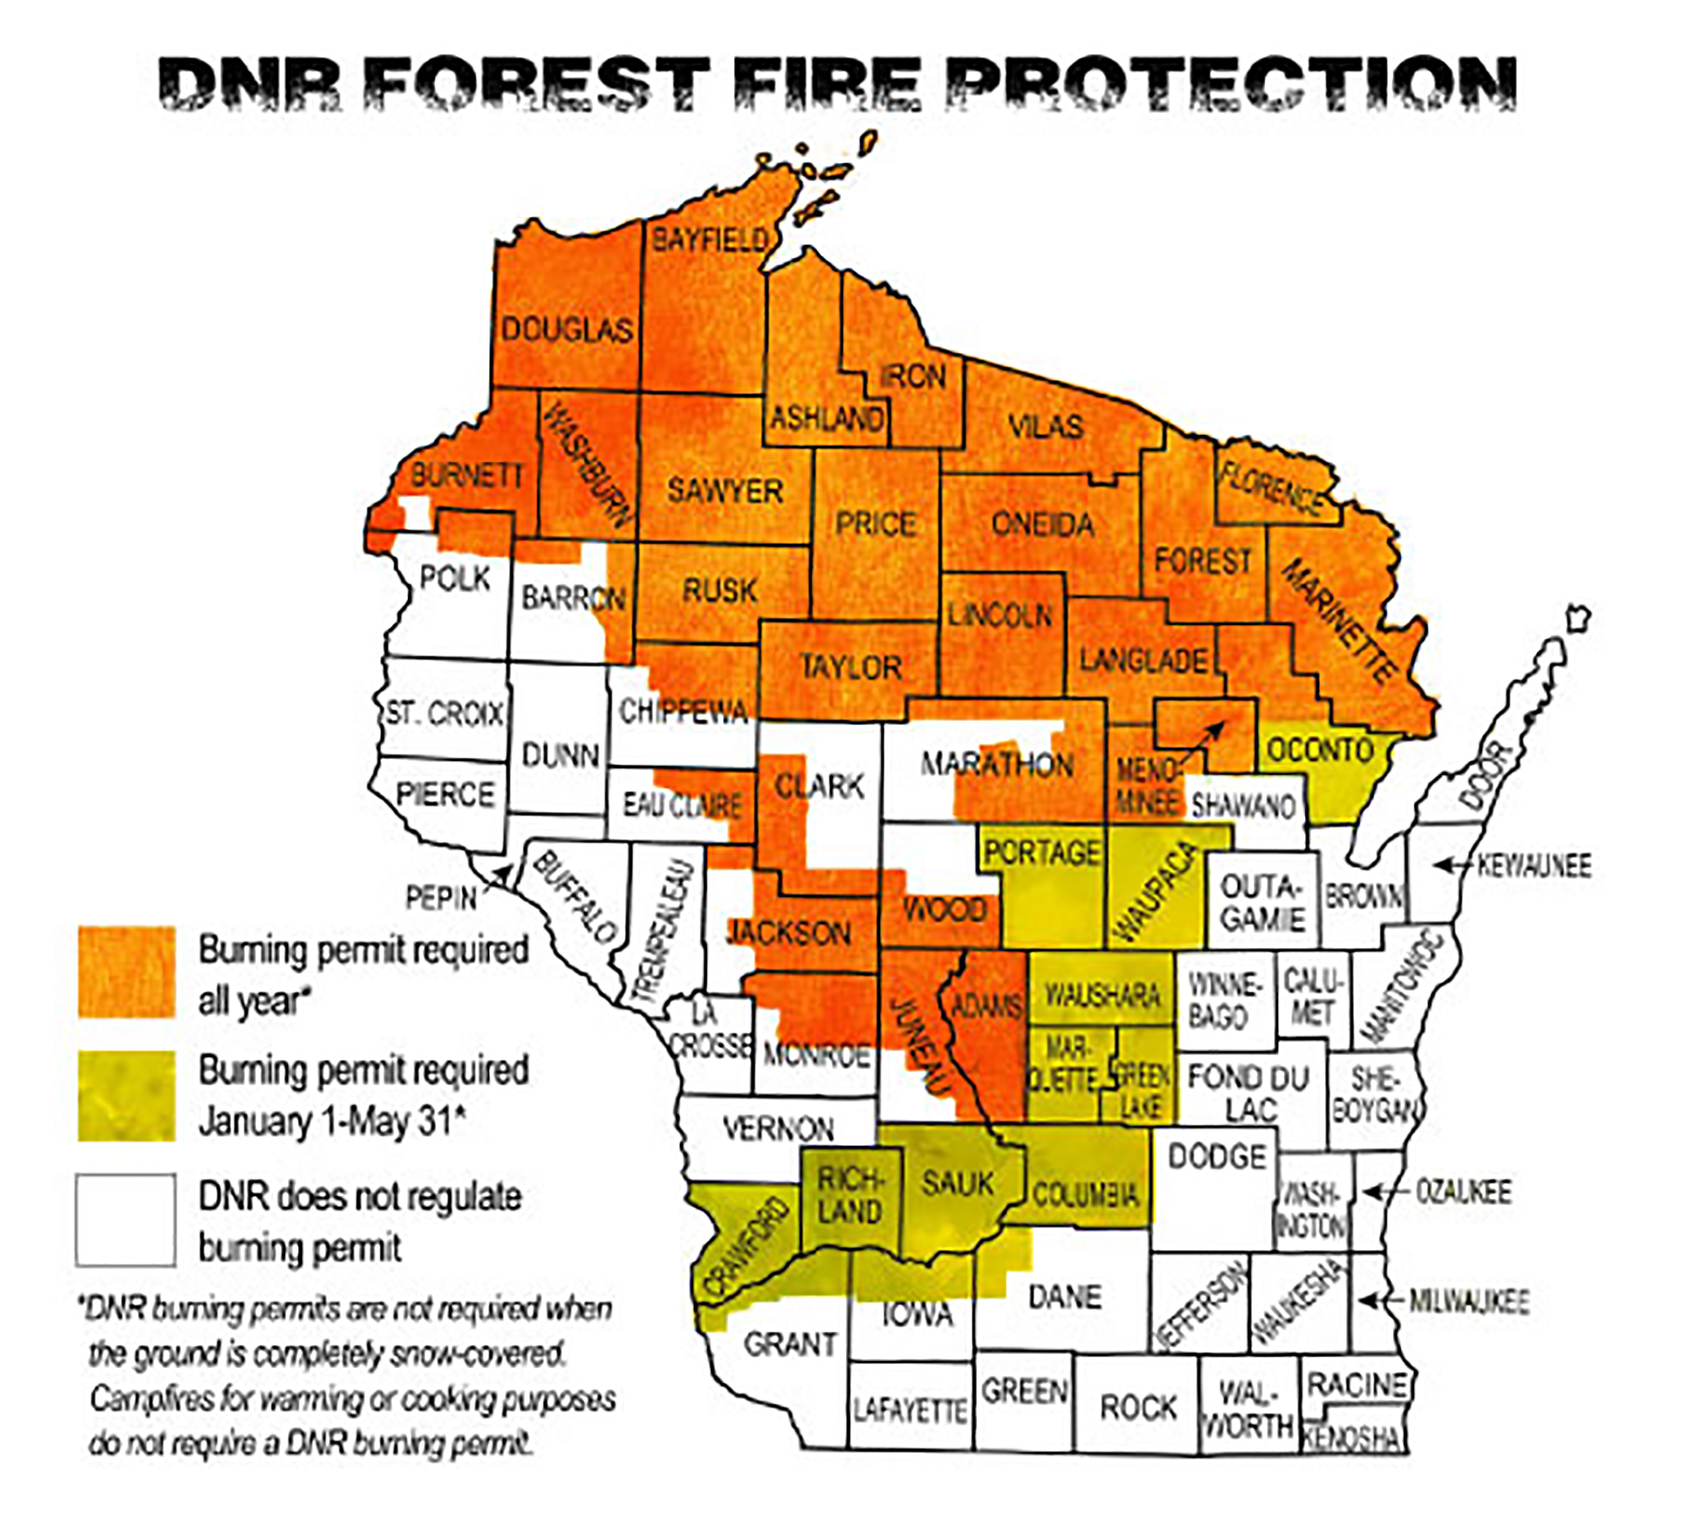 This screenshot from the DNR shows locations in Wisconsin where burning permits are required